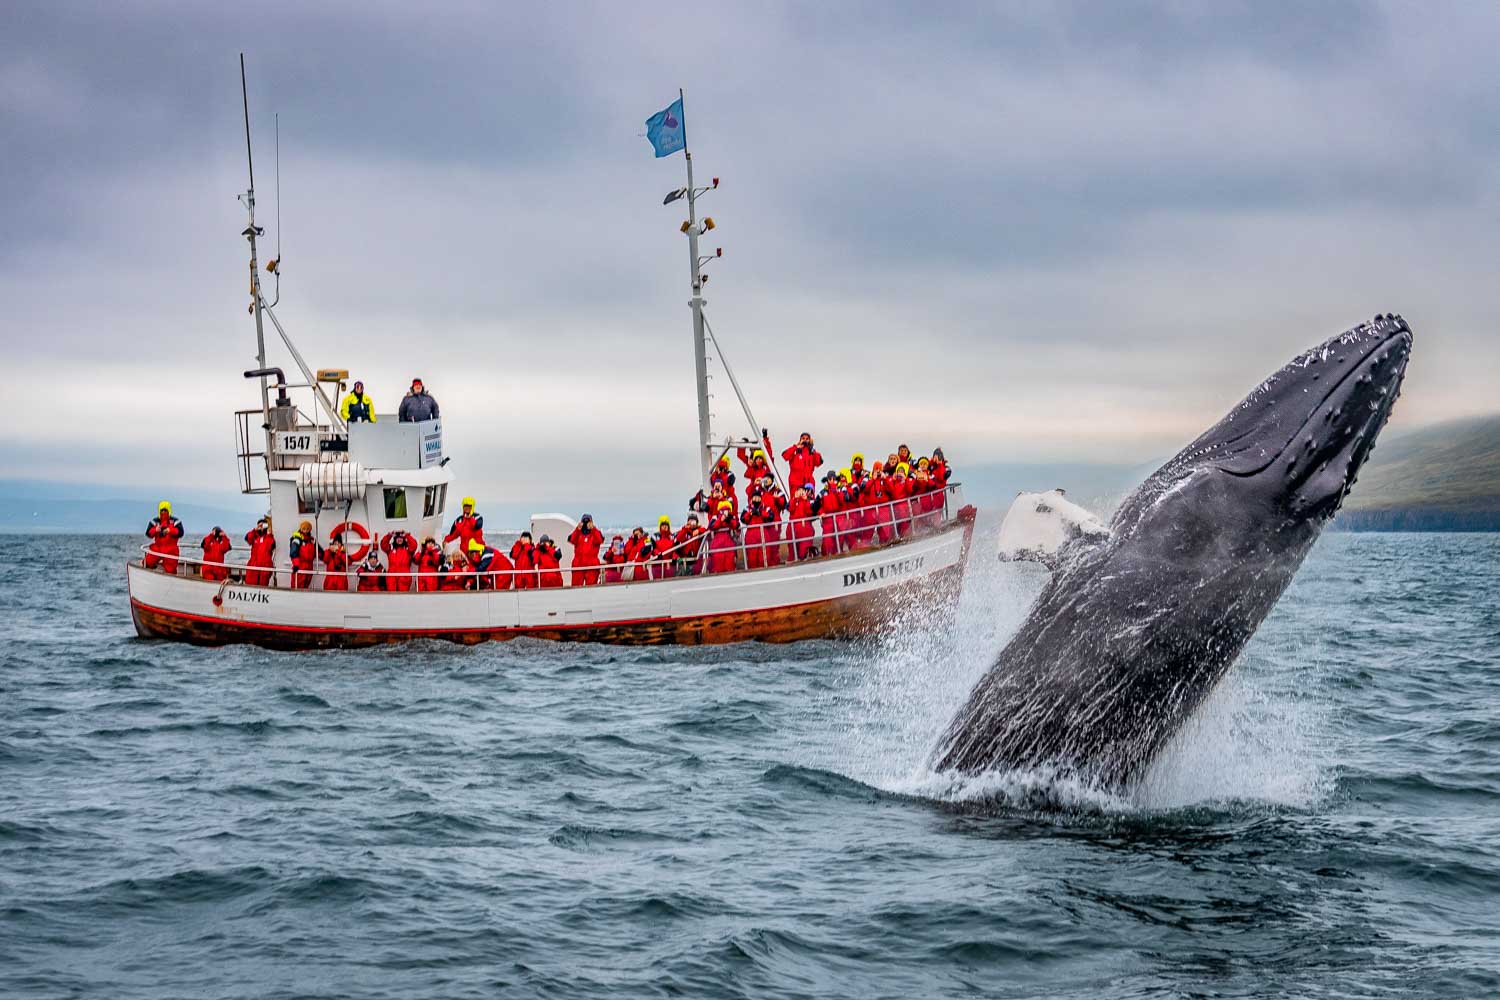 Whale Watching Tours in Iceland | Adventures.com